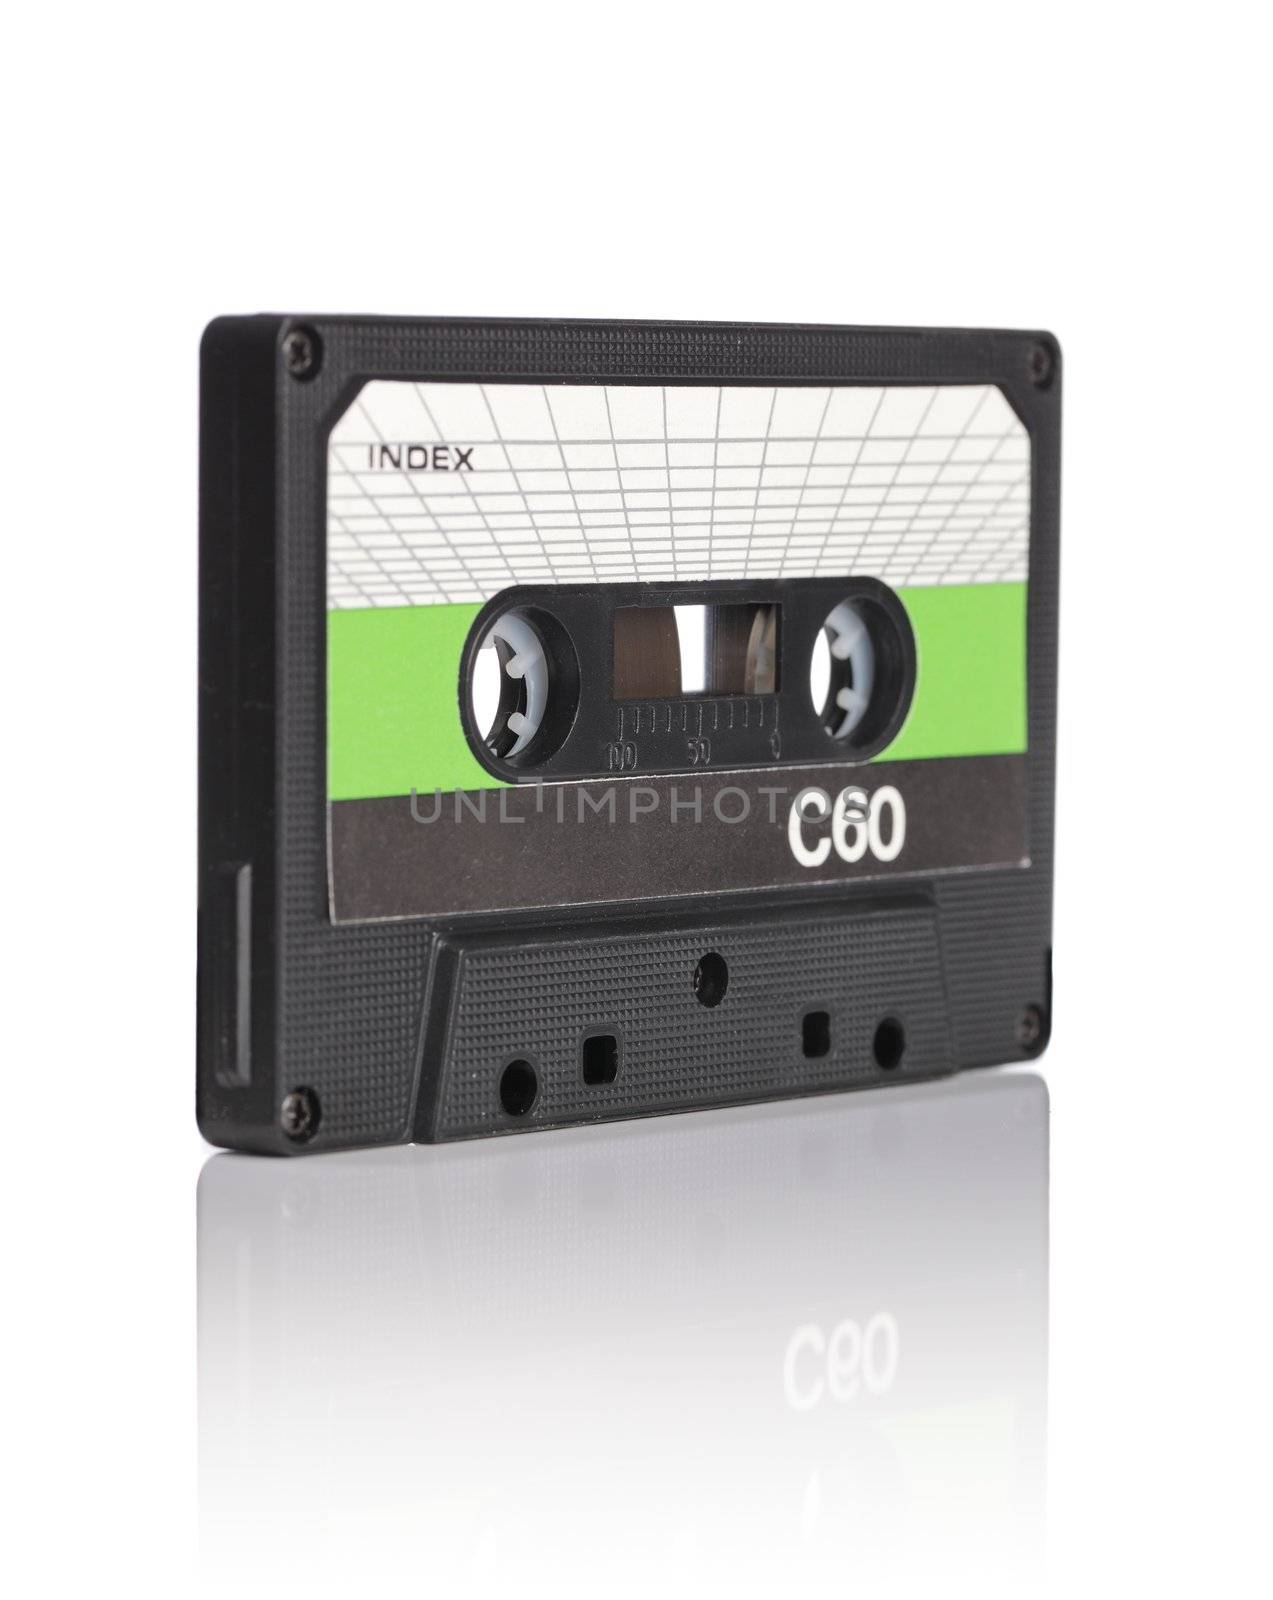 Old compact audio cassette on reflective white background. Very short depth-of-field.